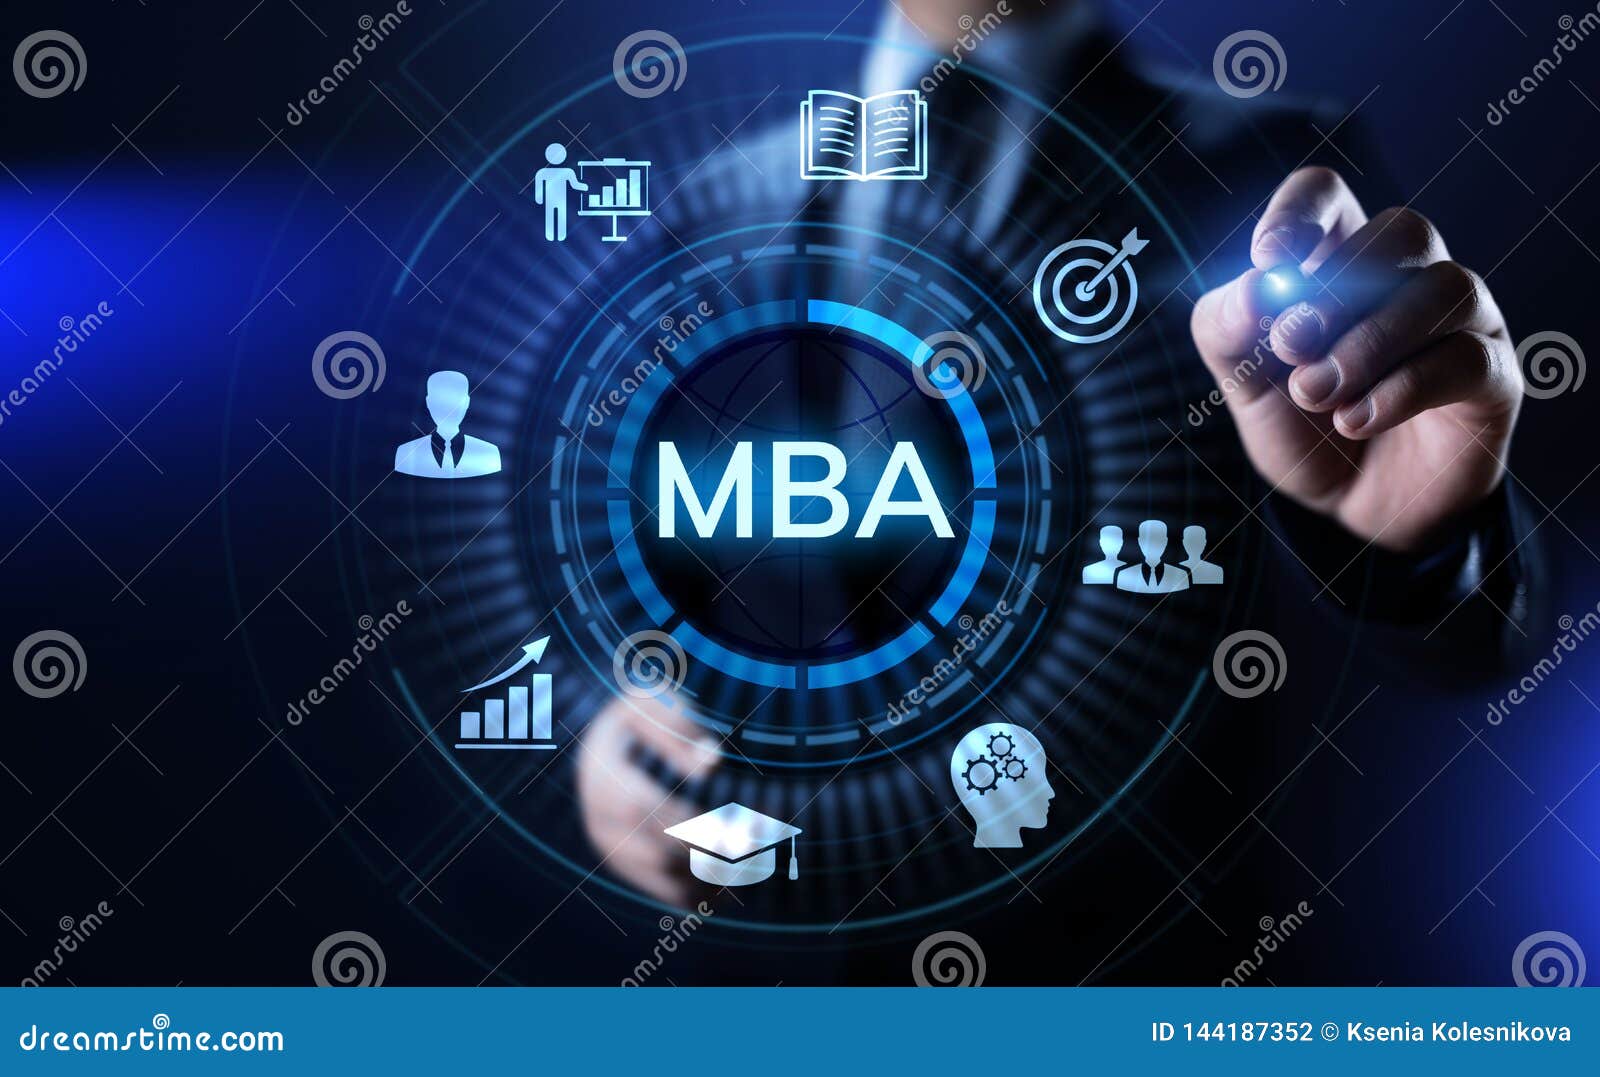 master in education business